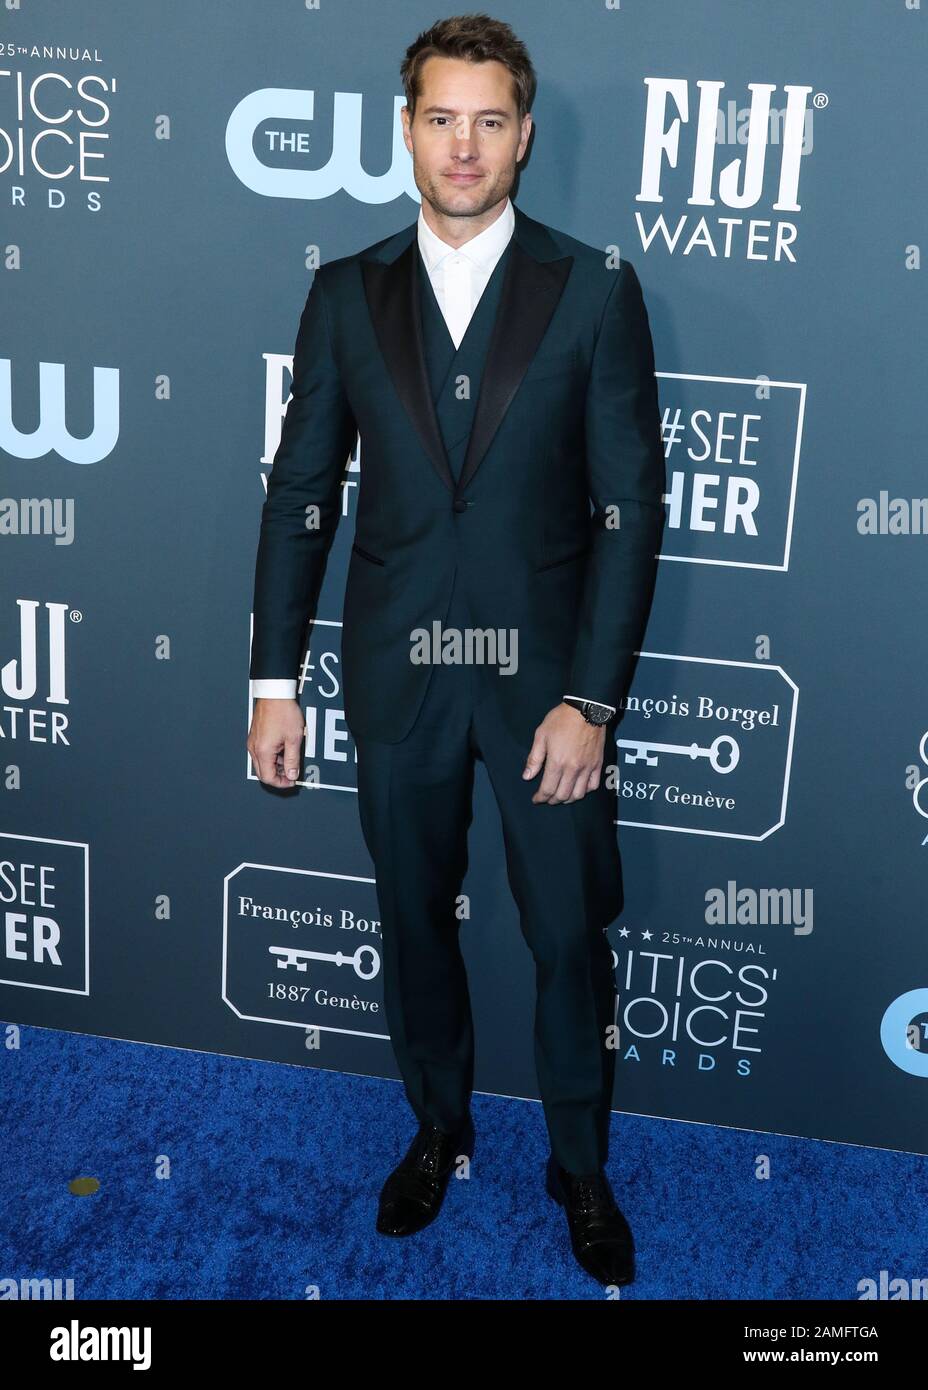 Santa Monica Los Angeles California Usa January 12 Actor Justin Hartley Wearing An Isaia Tux Christian Louboutin Shoes And An Omega Watch And Cuff Links Arrives At The 25th Annual Critics